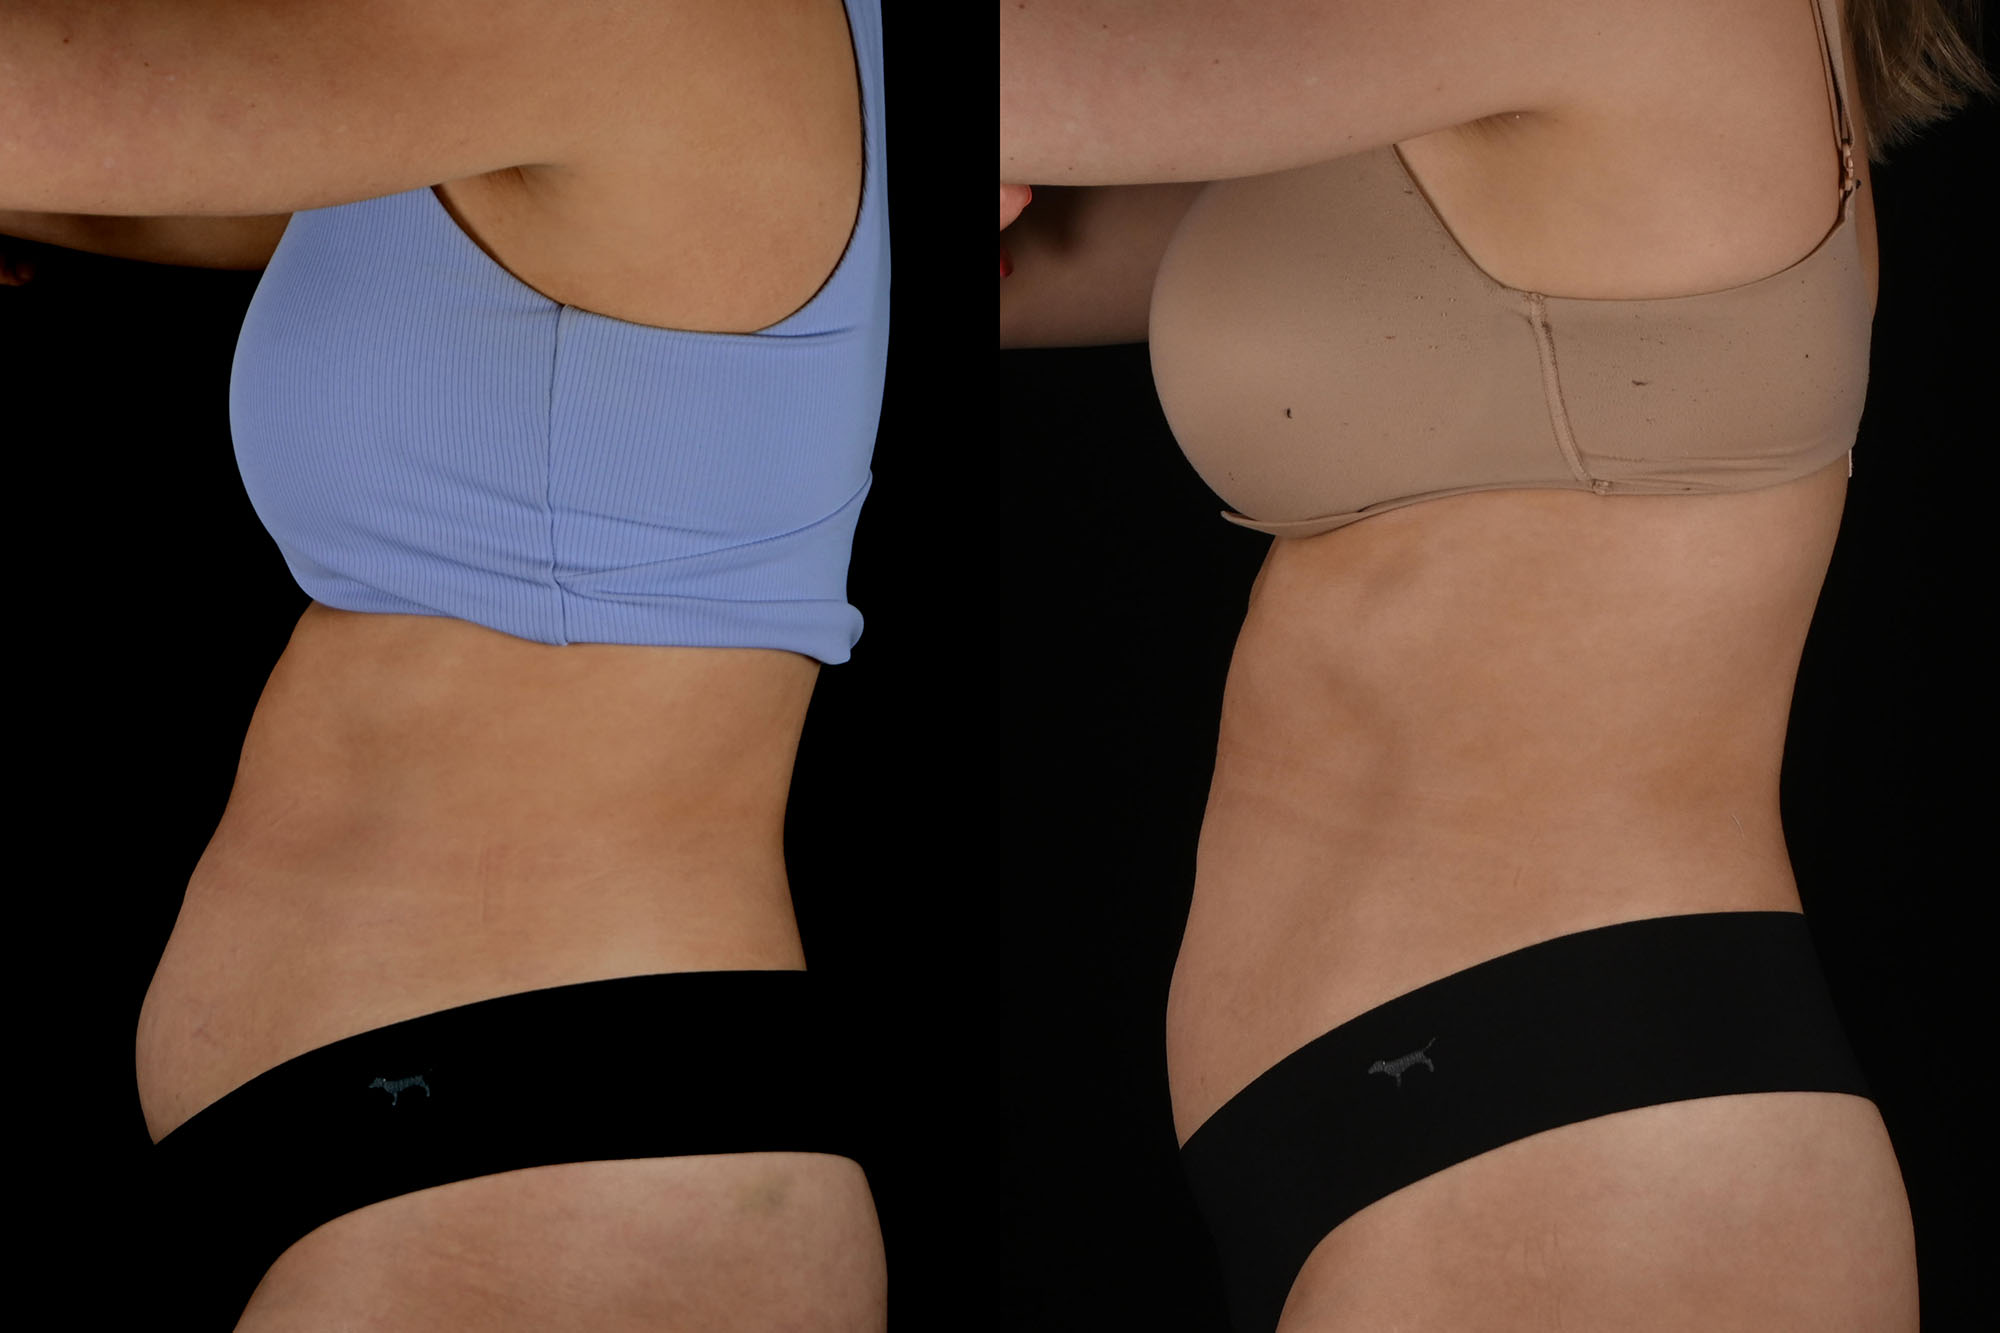 Before and After photo of left side of women showing smaller stomach after truBody treatments.